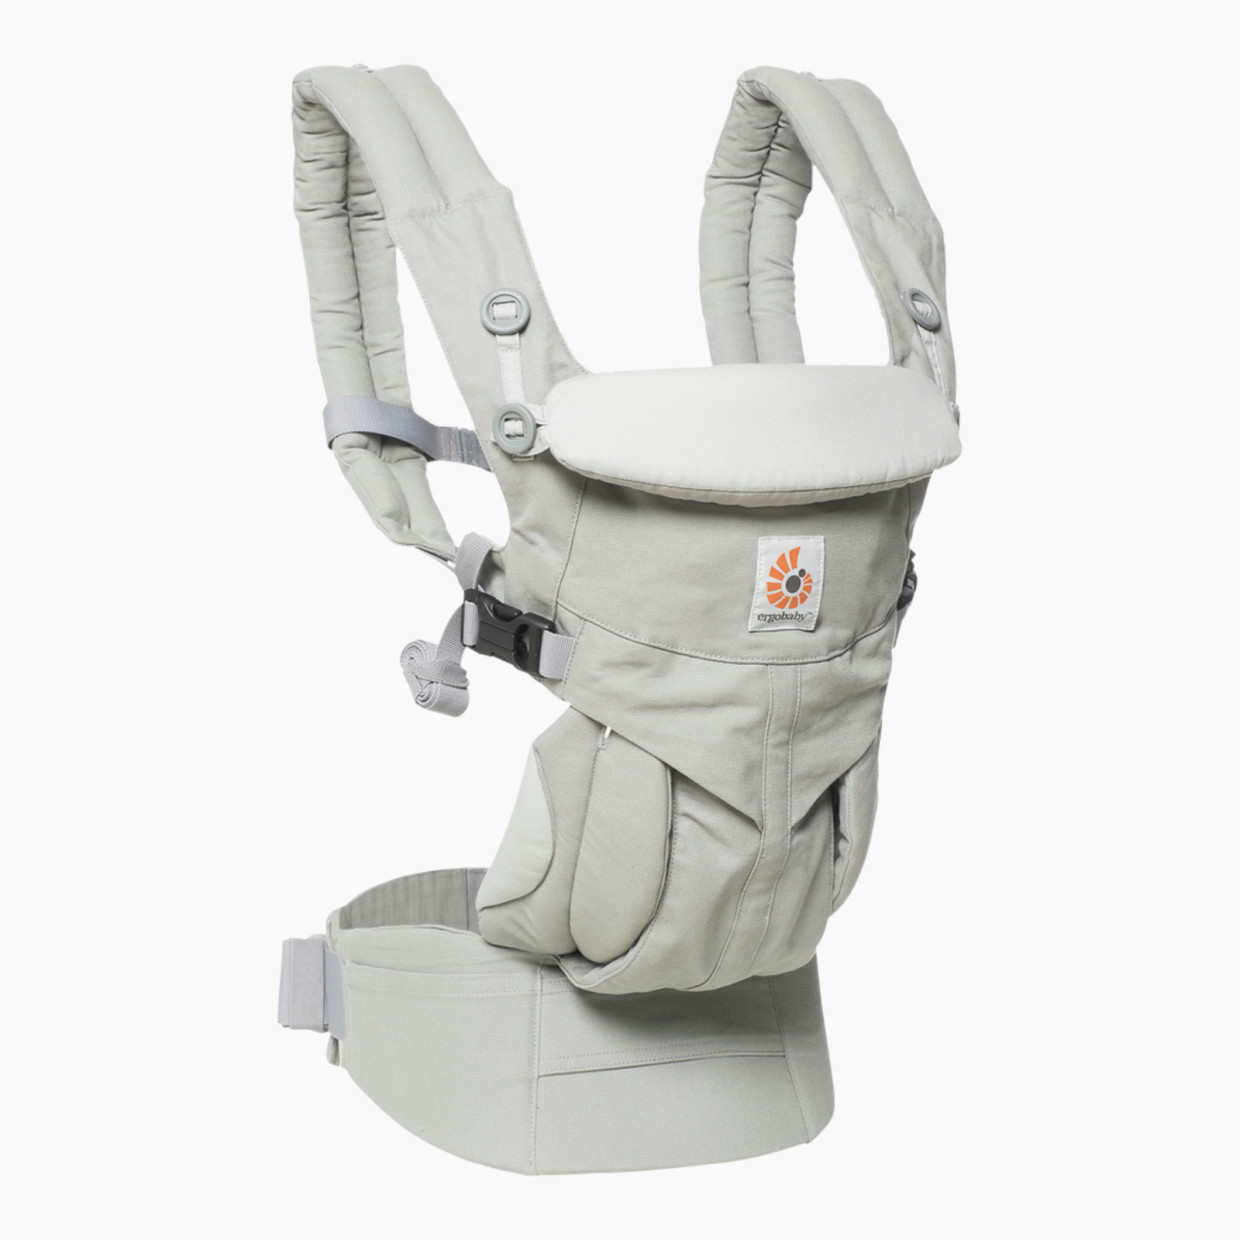 Ergobaby Omni 360 Baby Carrier - Pearl Gray.